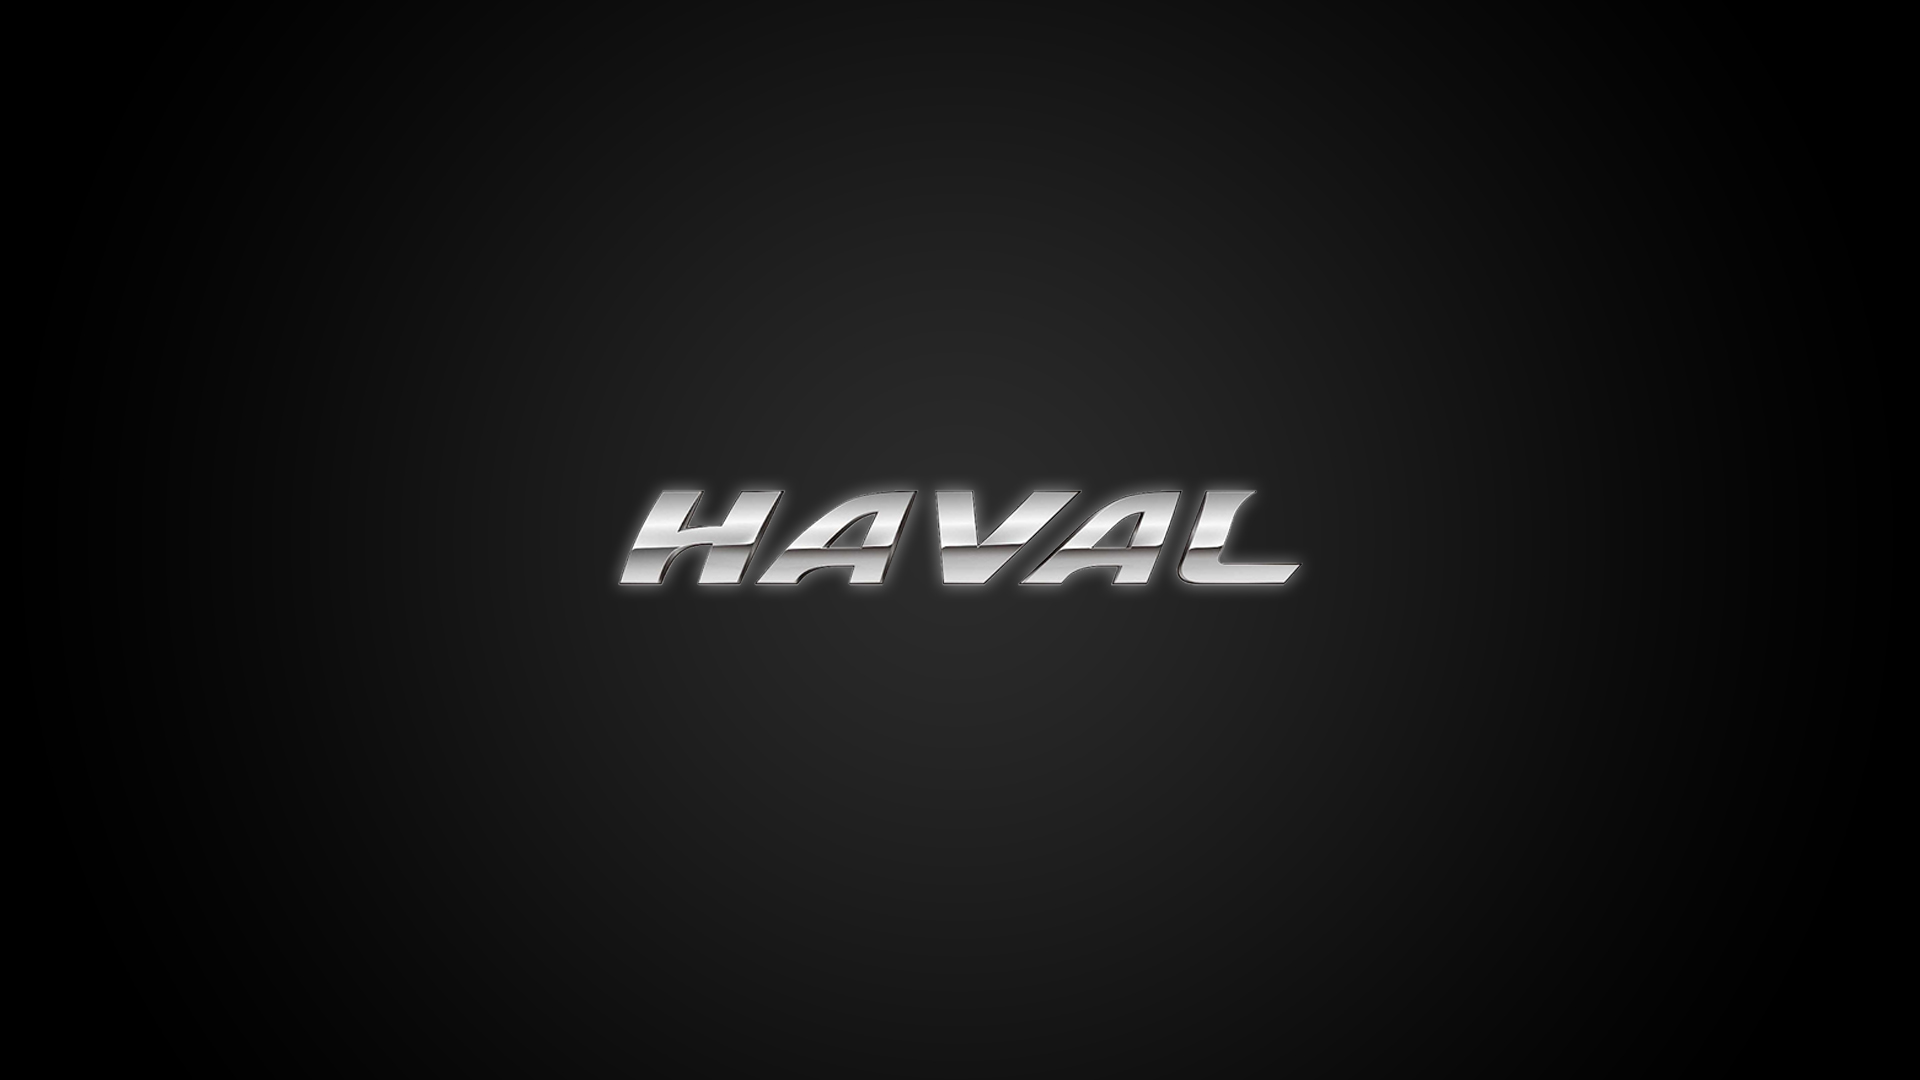 Haval Car Brand China Carmakers 1920x1080